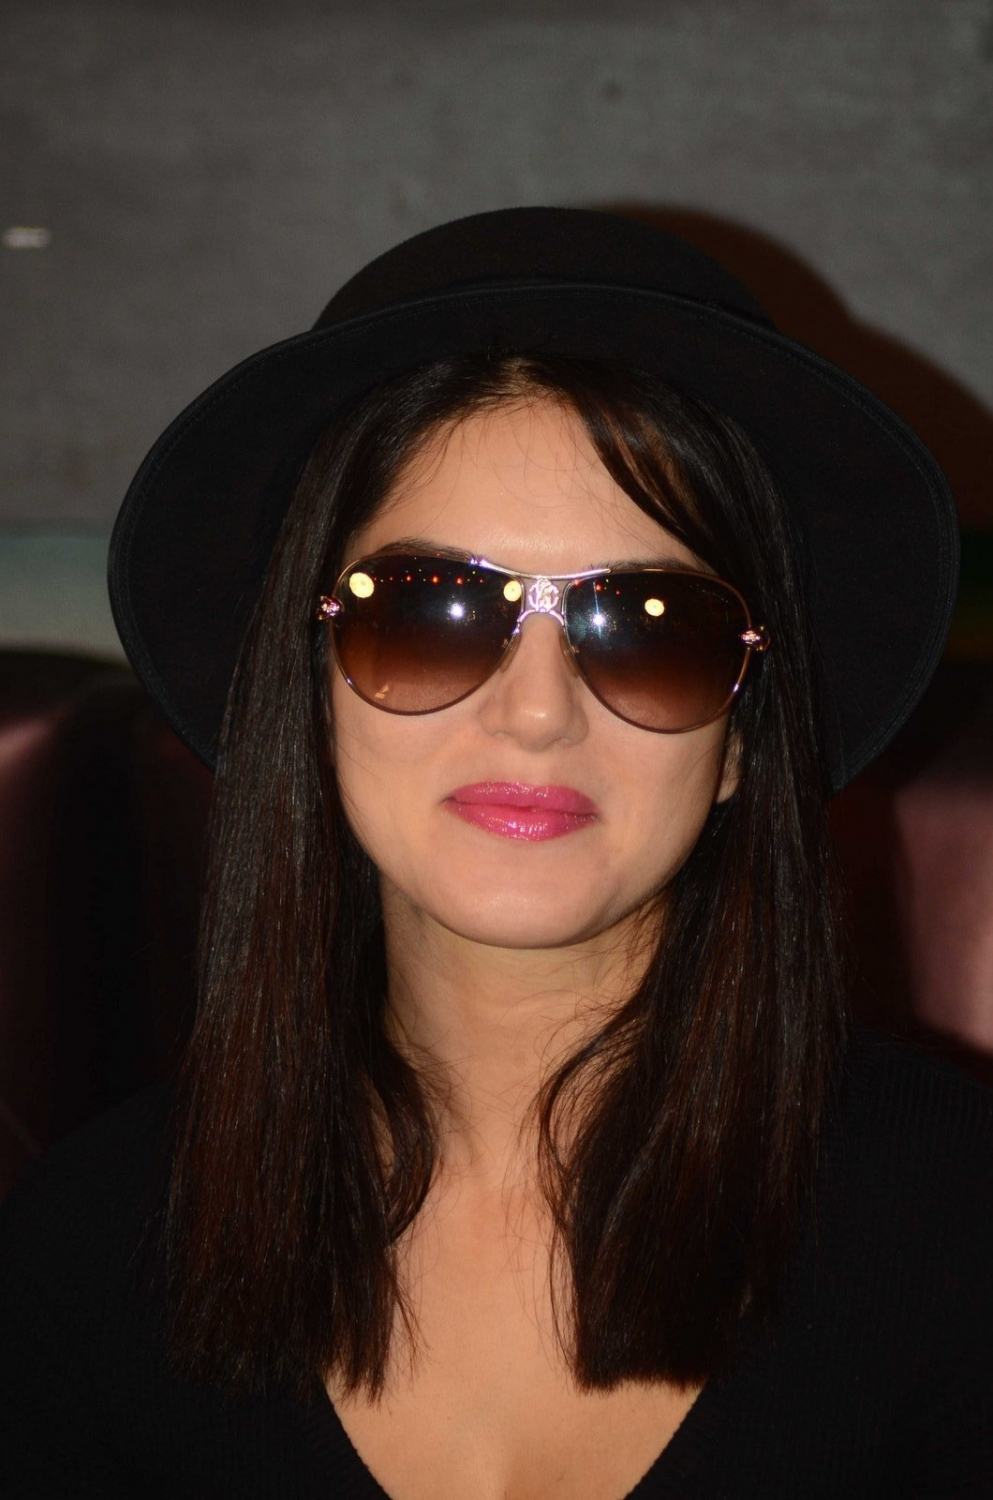 Still dont think I completely fit in Bollywood: Sunny Leone